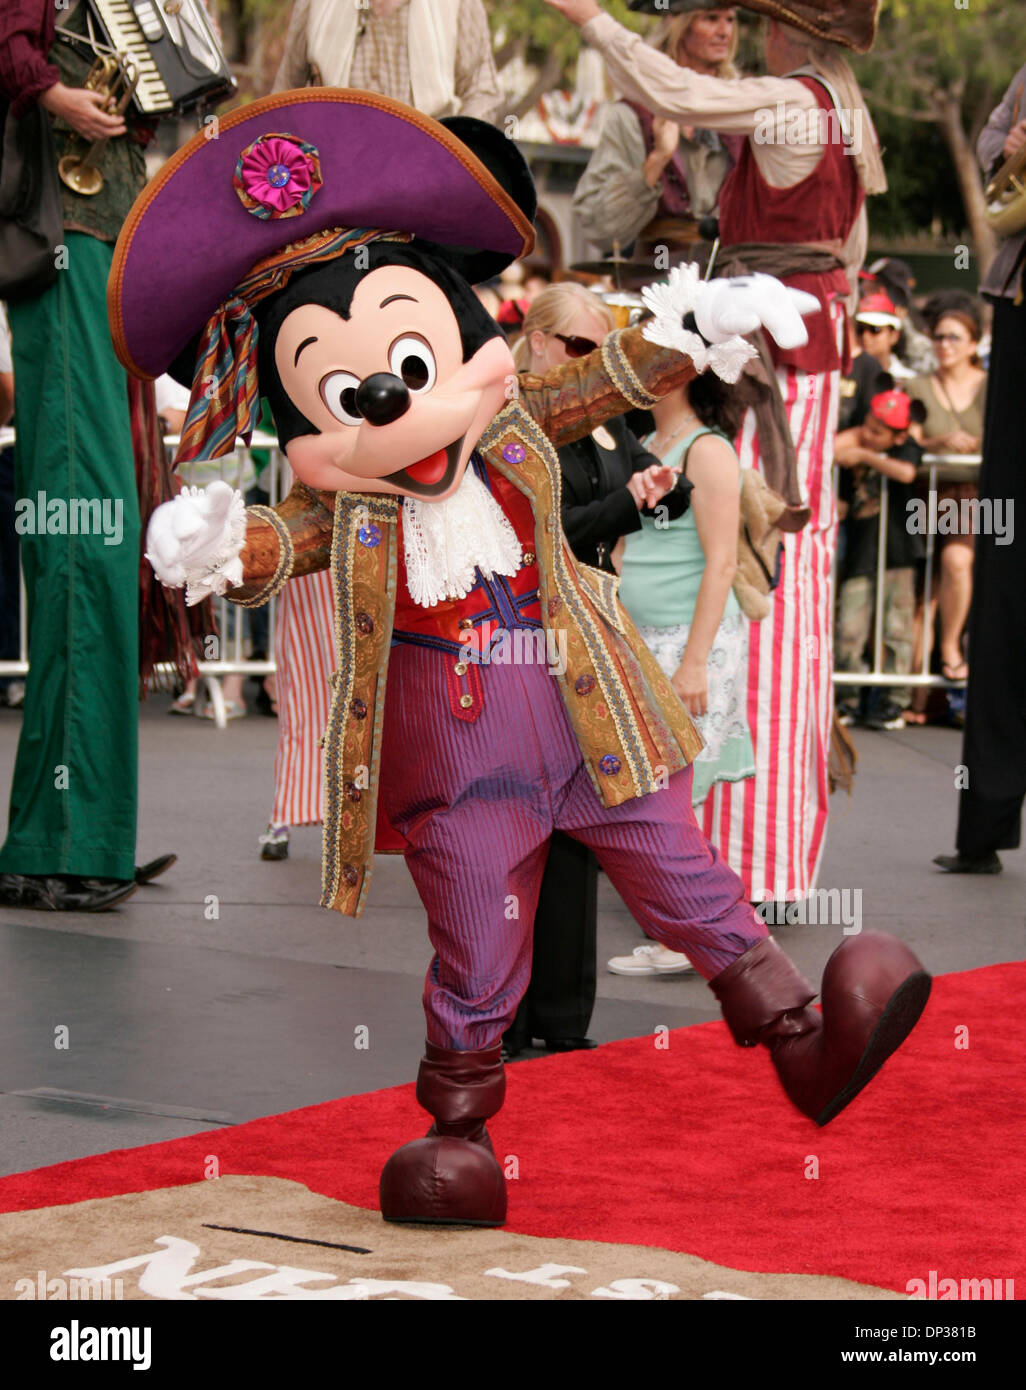 Jun 24, 2006; Anaheim, California, USA; Host MICKEY MOUSE at the 'Pirates Of The Caribbean: Dead Man's Chest' World Premiere held at Disneyland. Mandatory Credit: Photo by Lisa O'Connor/ZUMA Press. (©) Copyright 2006 by Lisa O'Connor Stock Photo